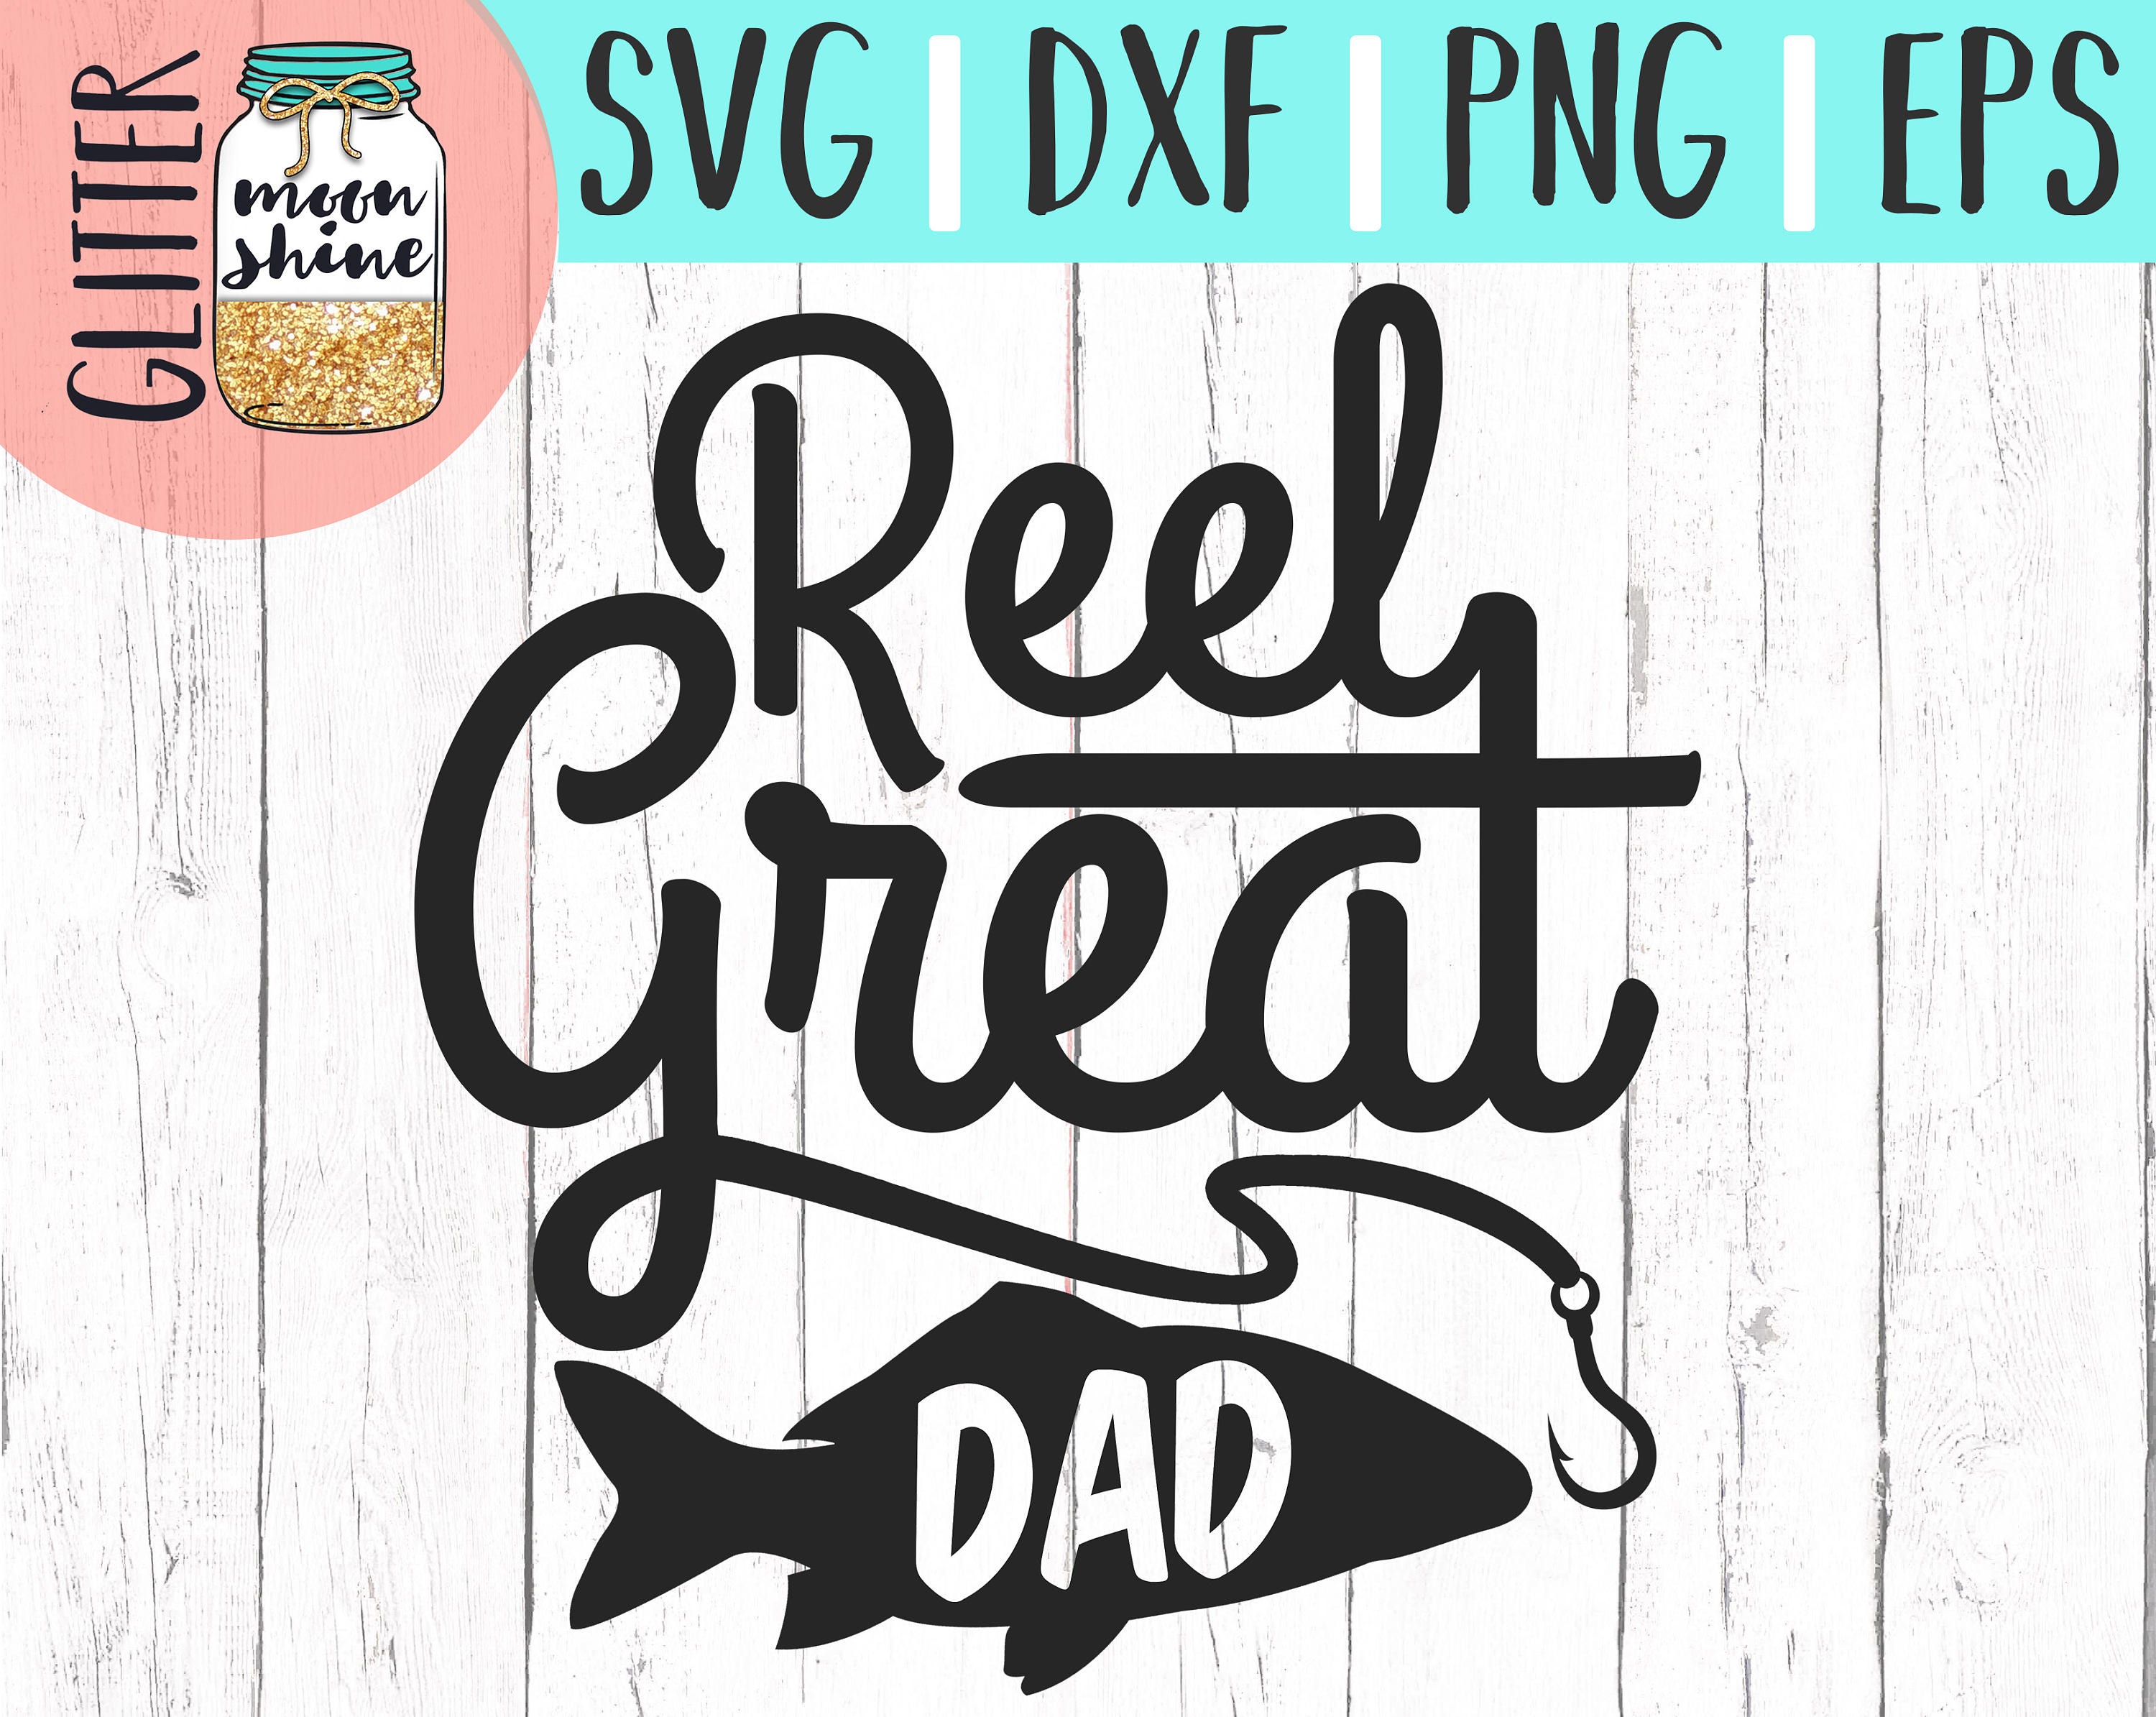 Reel Great Dad svg eps dxf png Files for Cutting Machines